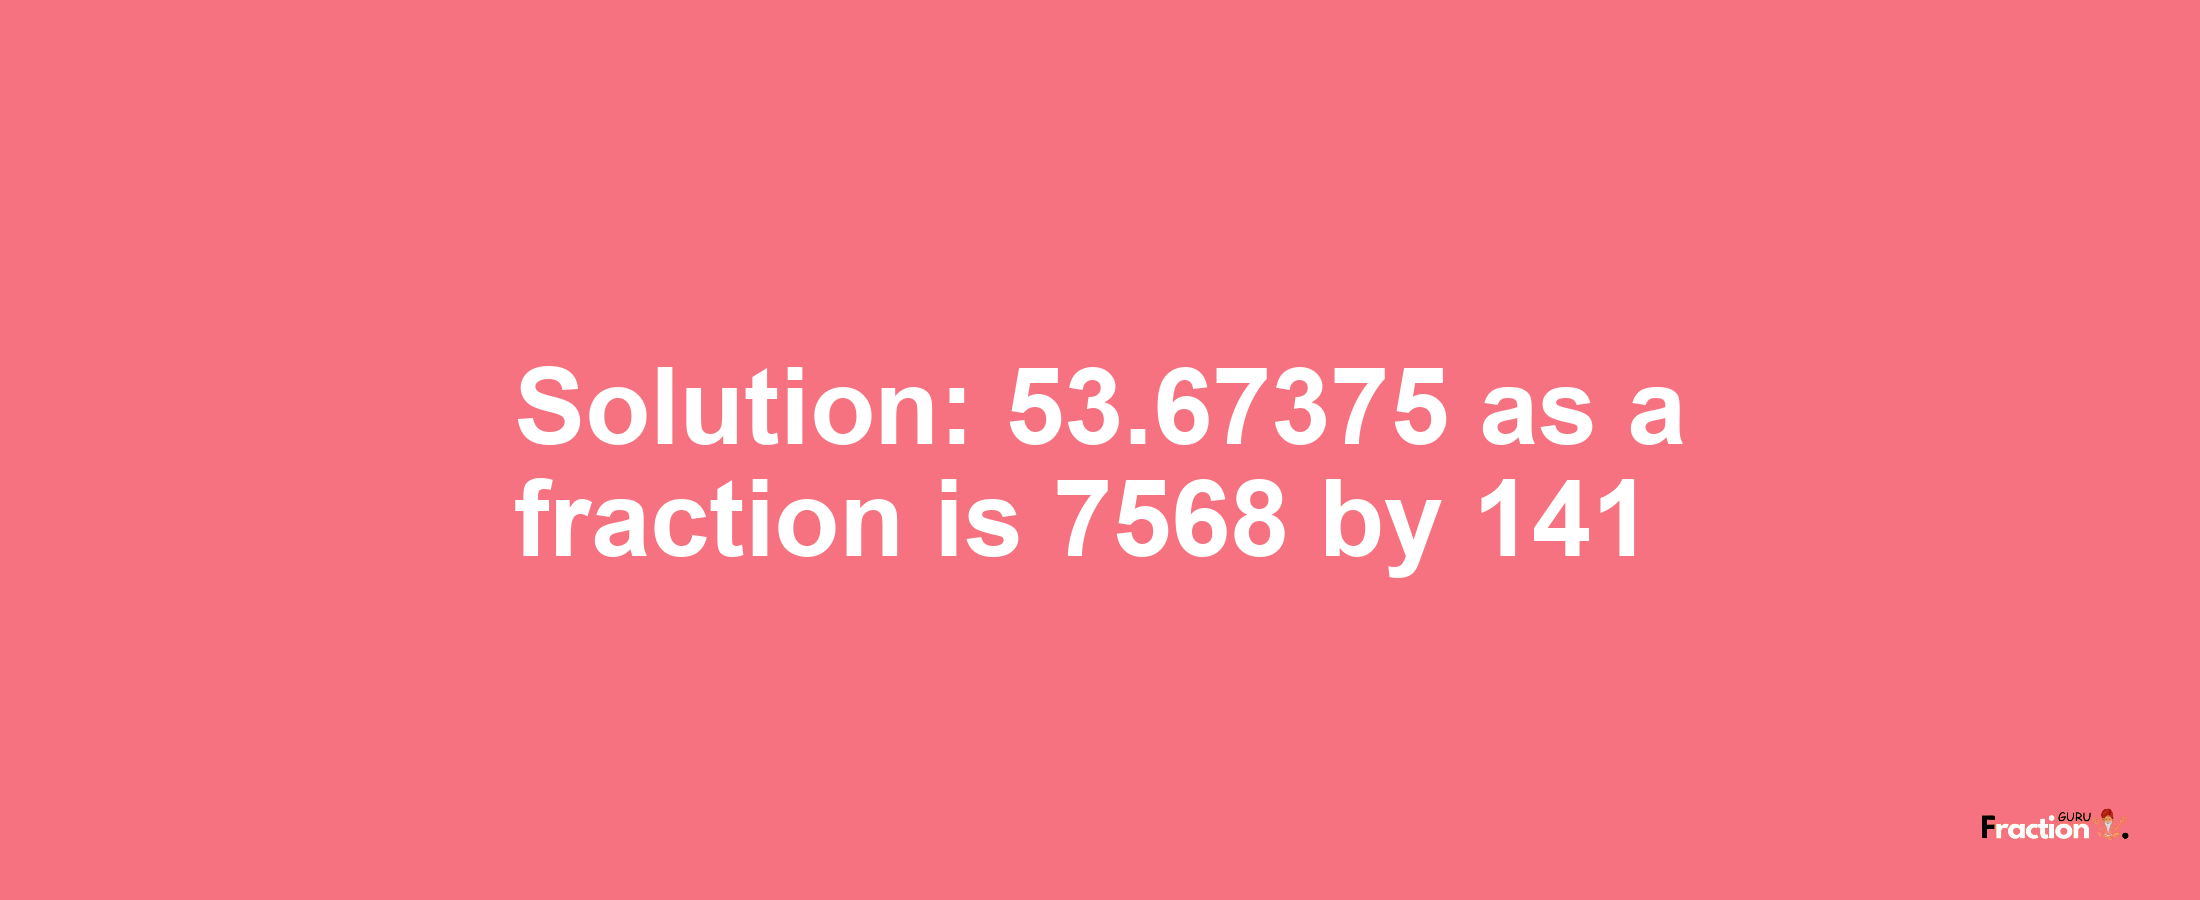 Solution:53.67375 as a fraction is 7568/141